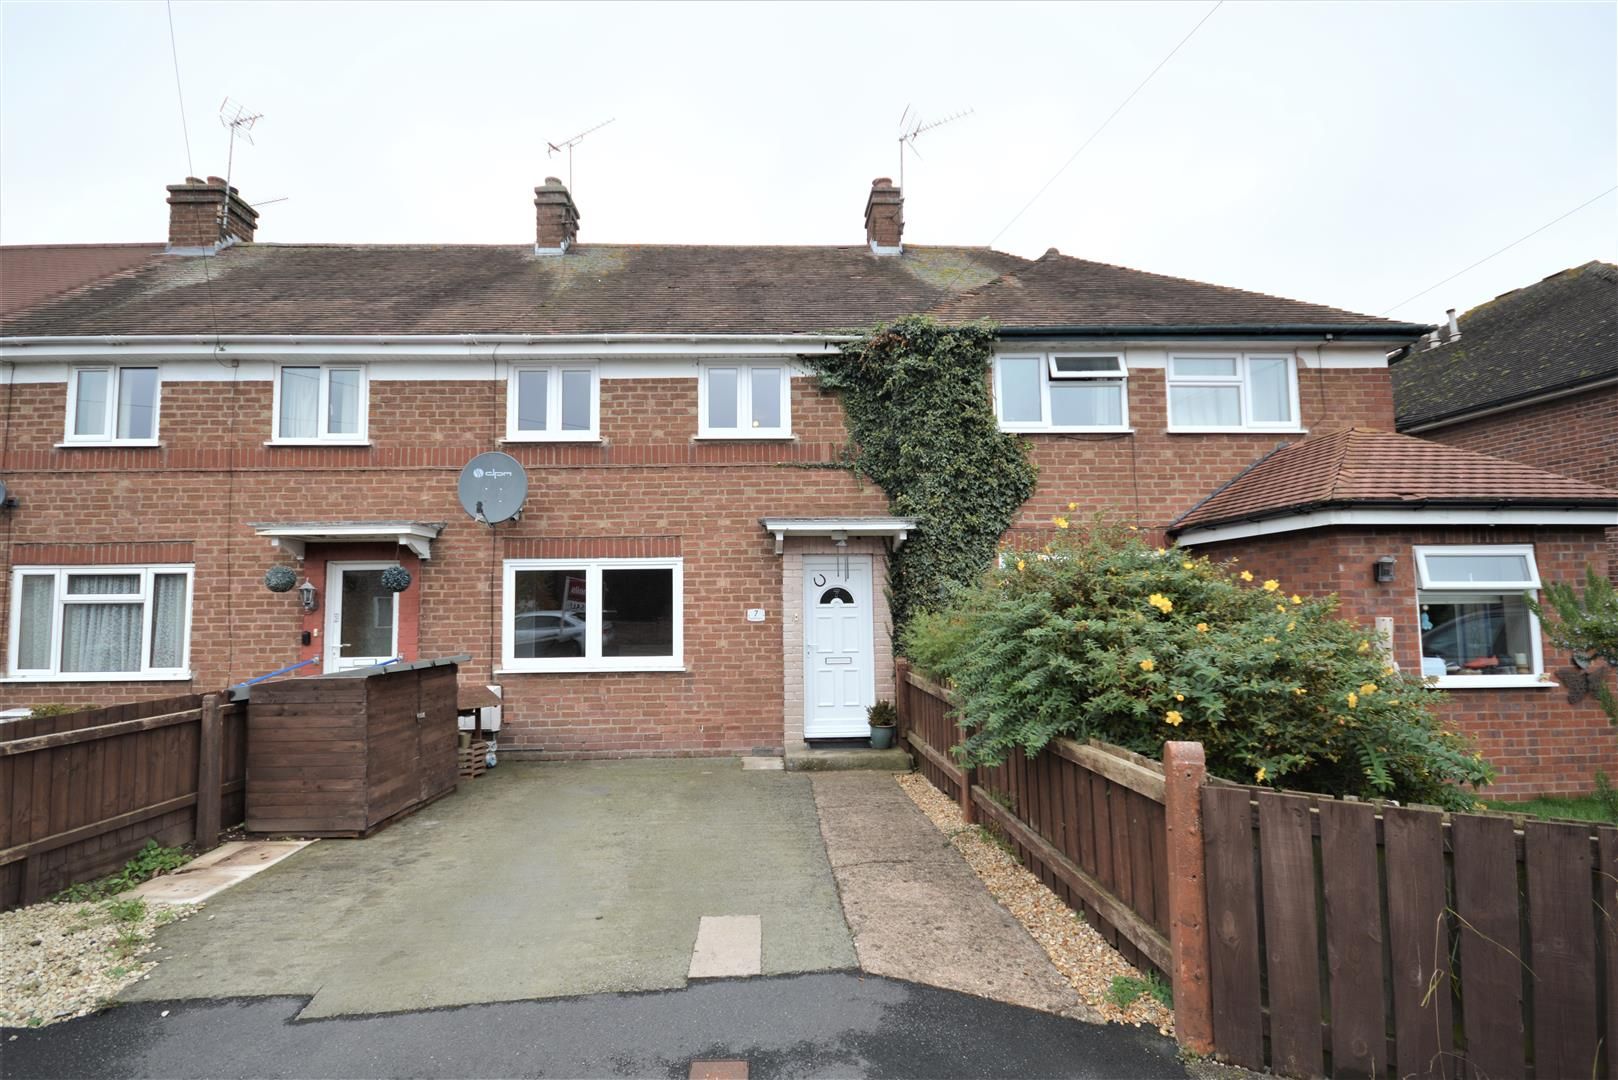 3 bed terraced for sale  - Property Image 3